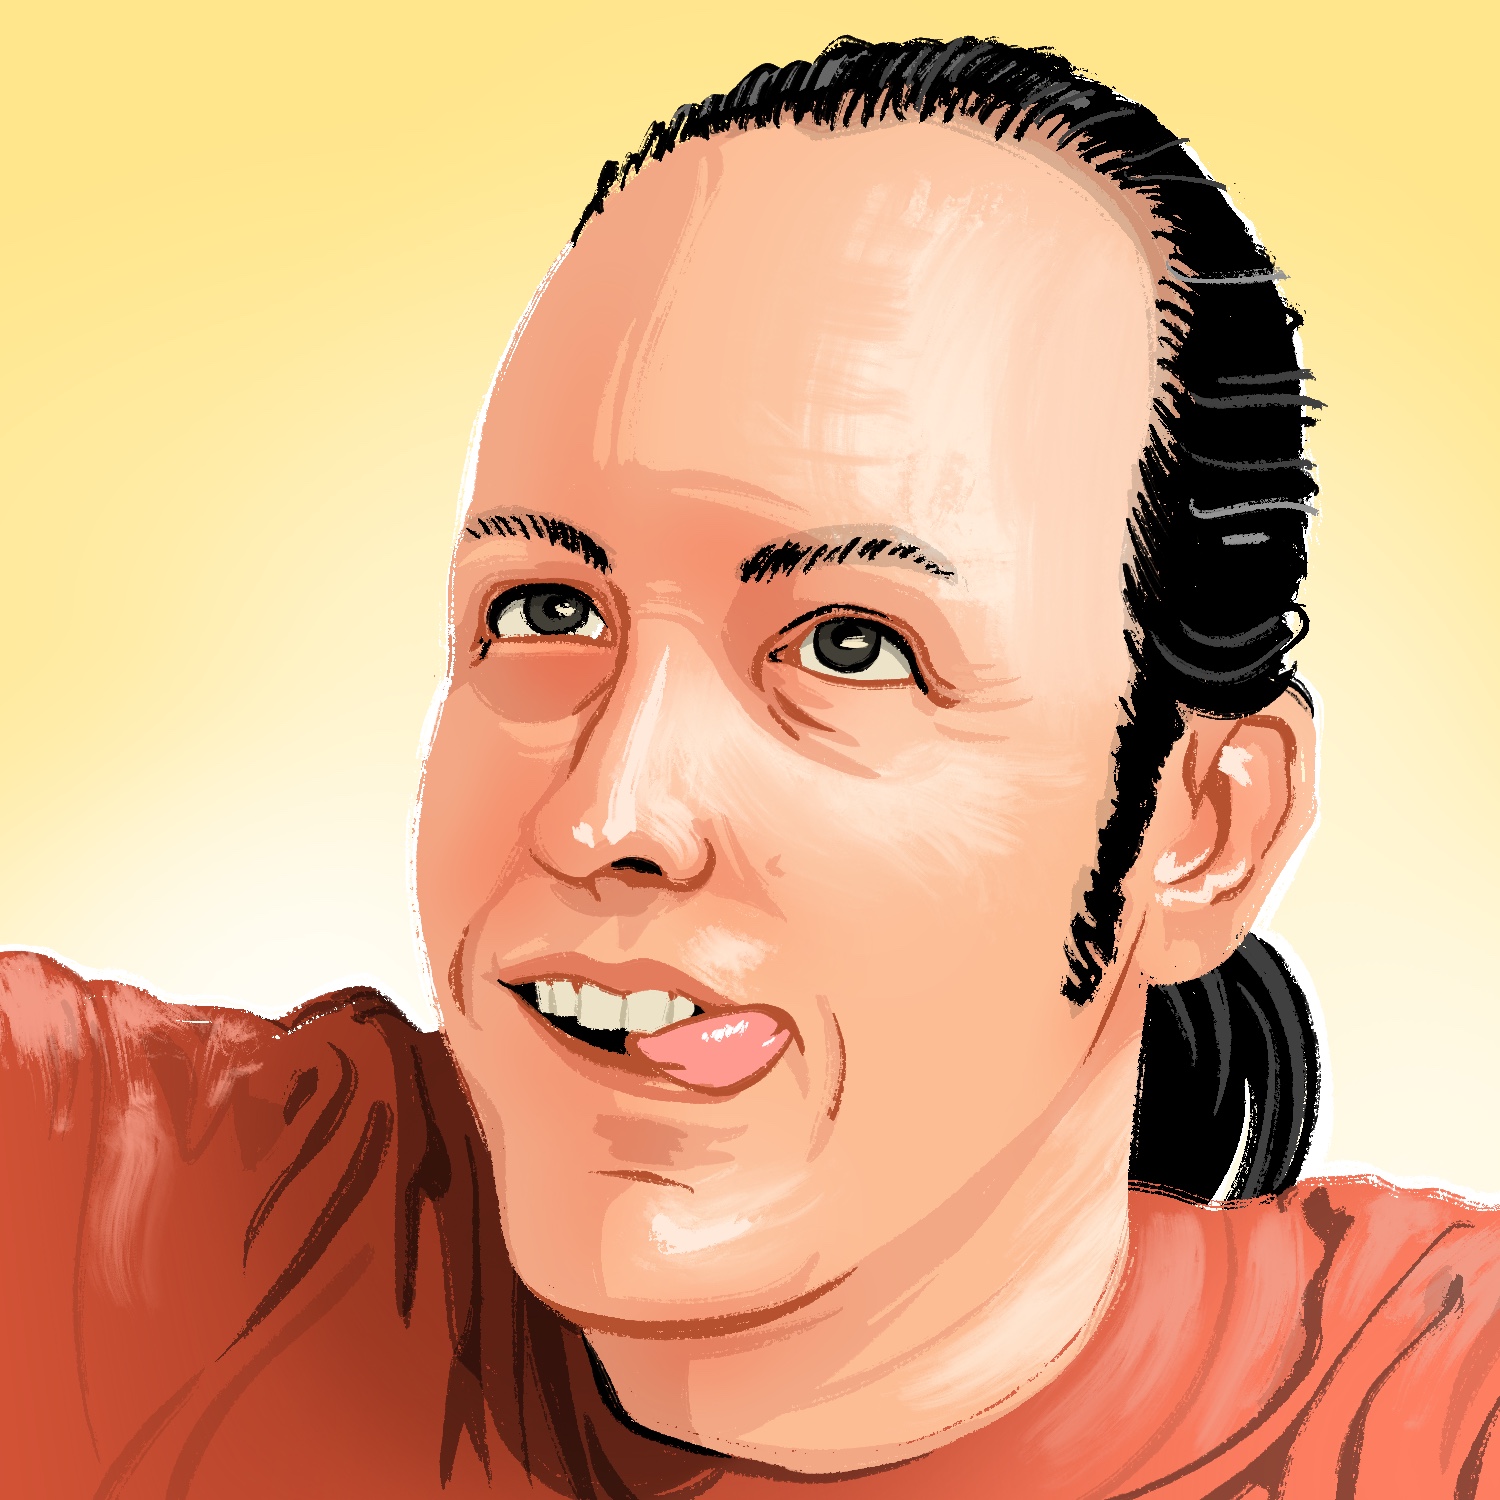 A self-portrait illustration of me! As pictured in the image, I am a man with a light complexion, dark eyes, and dark hair. I am looking up and slightly to the left, at an out-of-frame camera, and have my tongue sticking out of the right side of my mouth. My hair is long and pulled back into a ponytail, which you can see over my right shoulder. I have on a red shirt that is bunched up from my arm holding the camera, and the background is a pale yellow that fades to white towards the bottom.